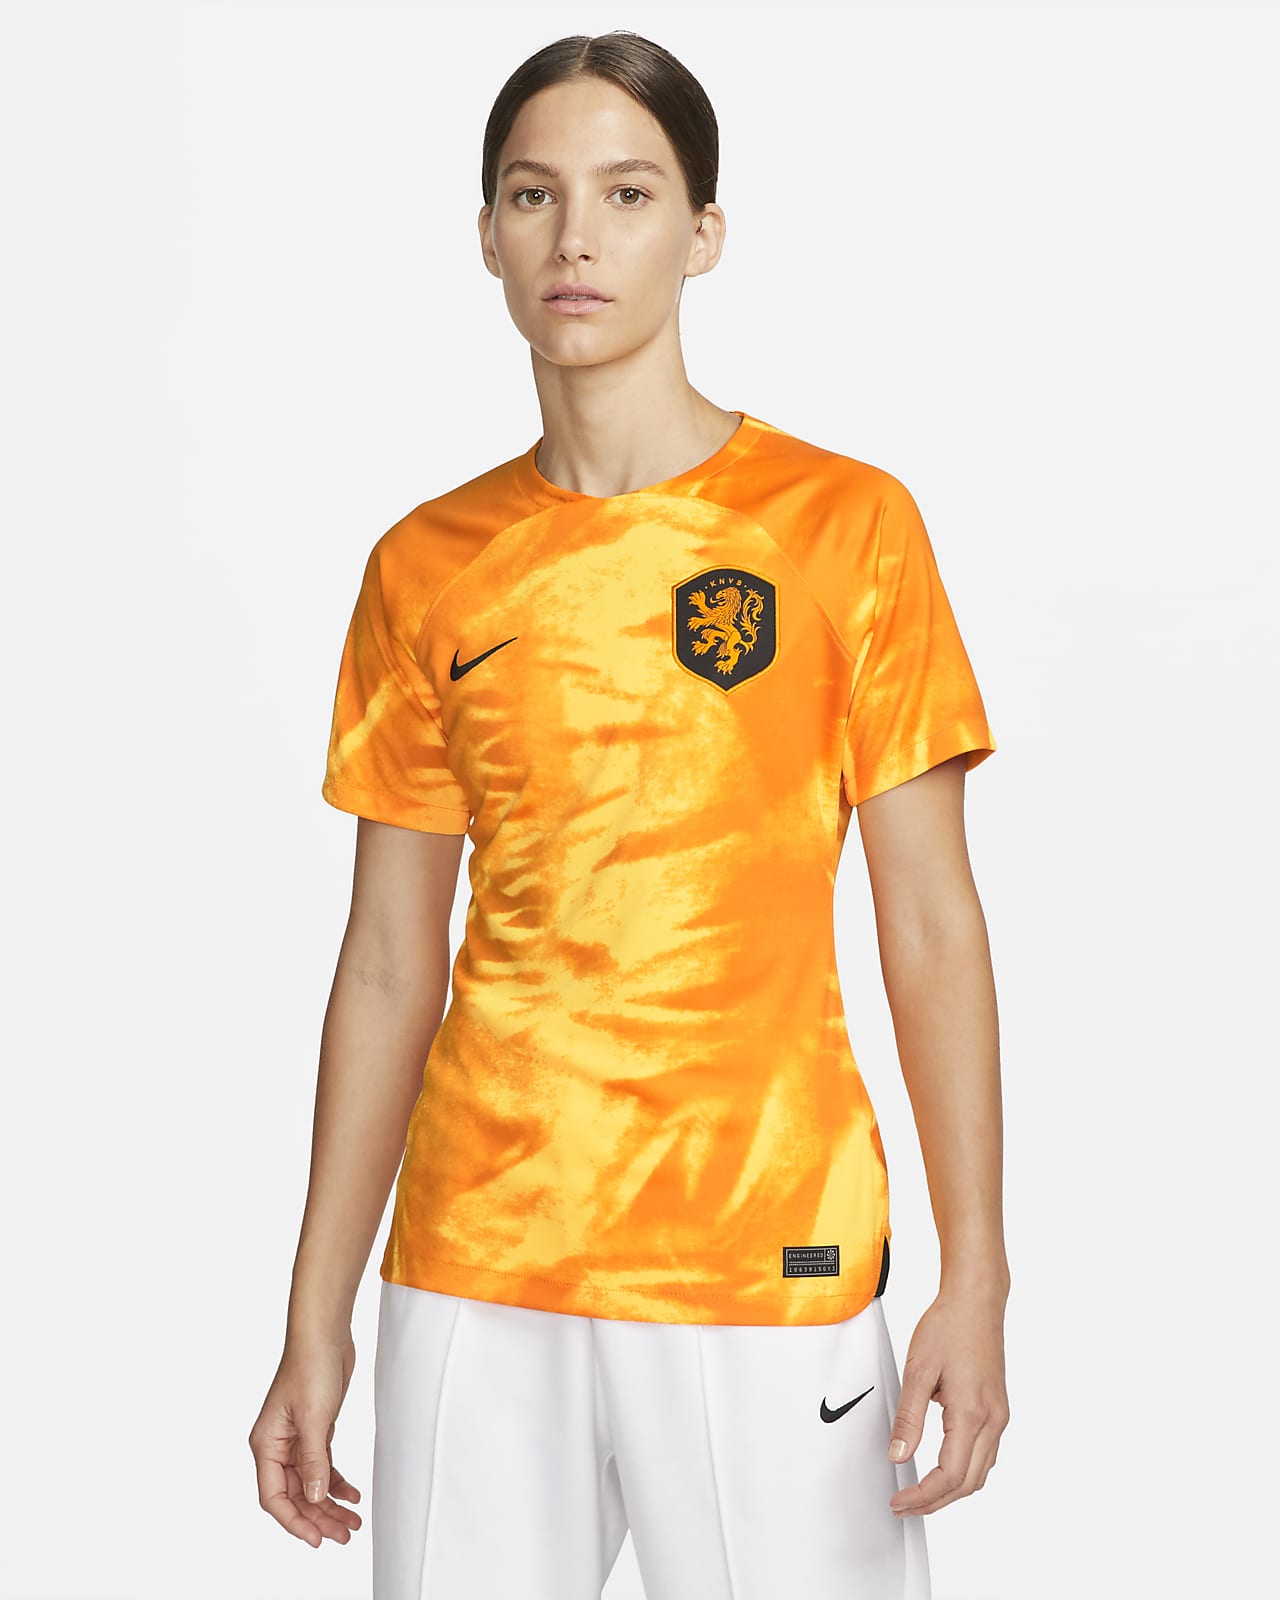 Netherlands 2022 World Cup Home & Away Kits Released - Footy Headlines